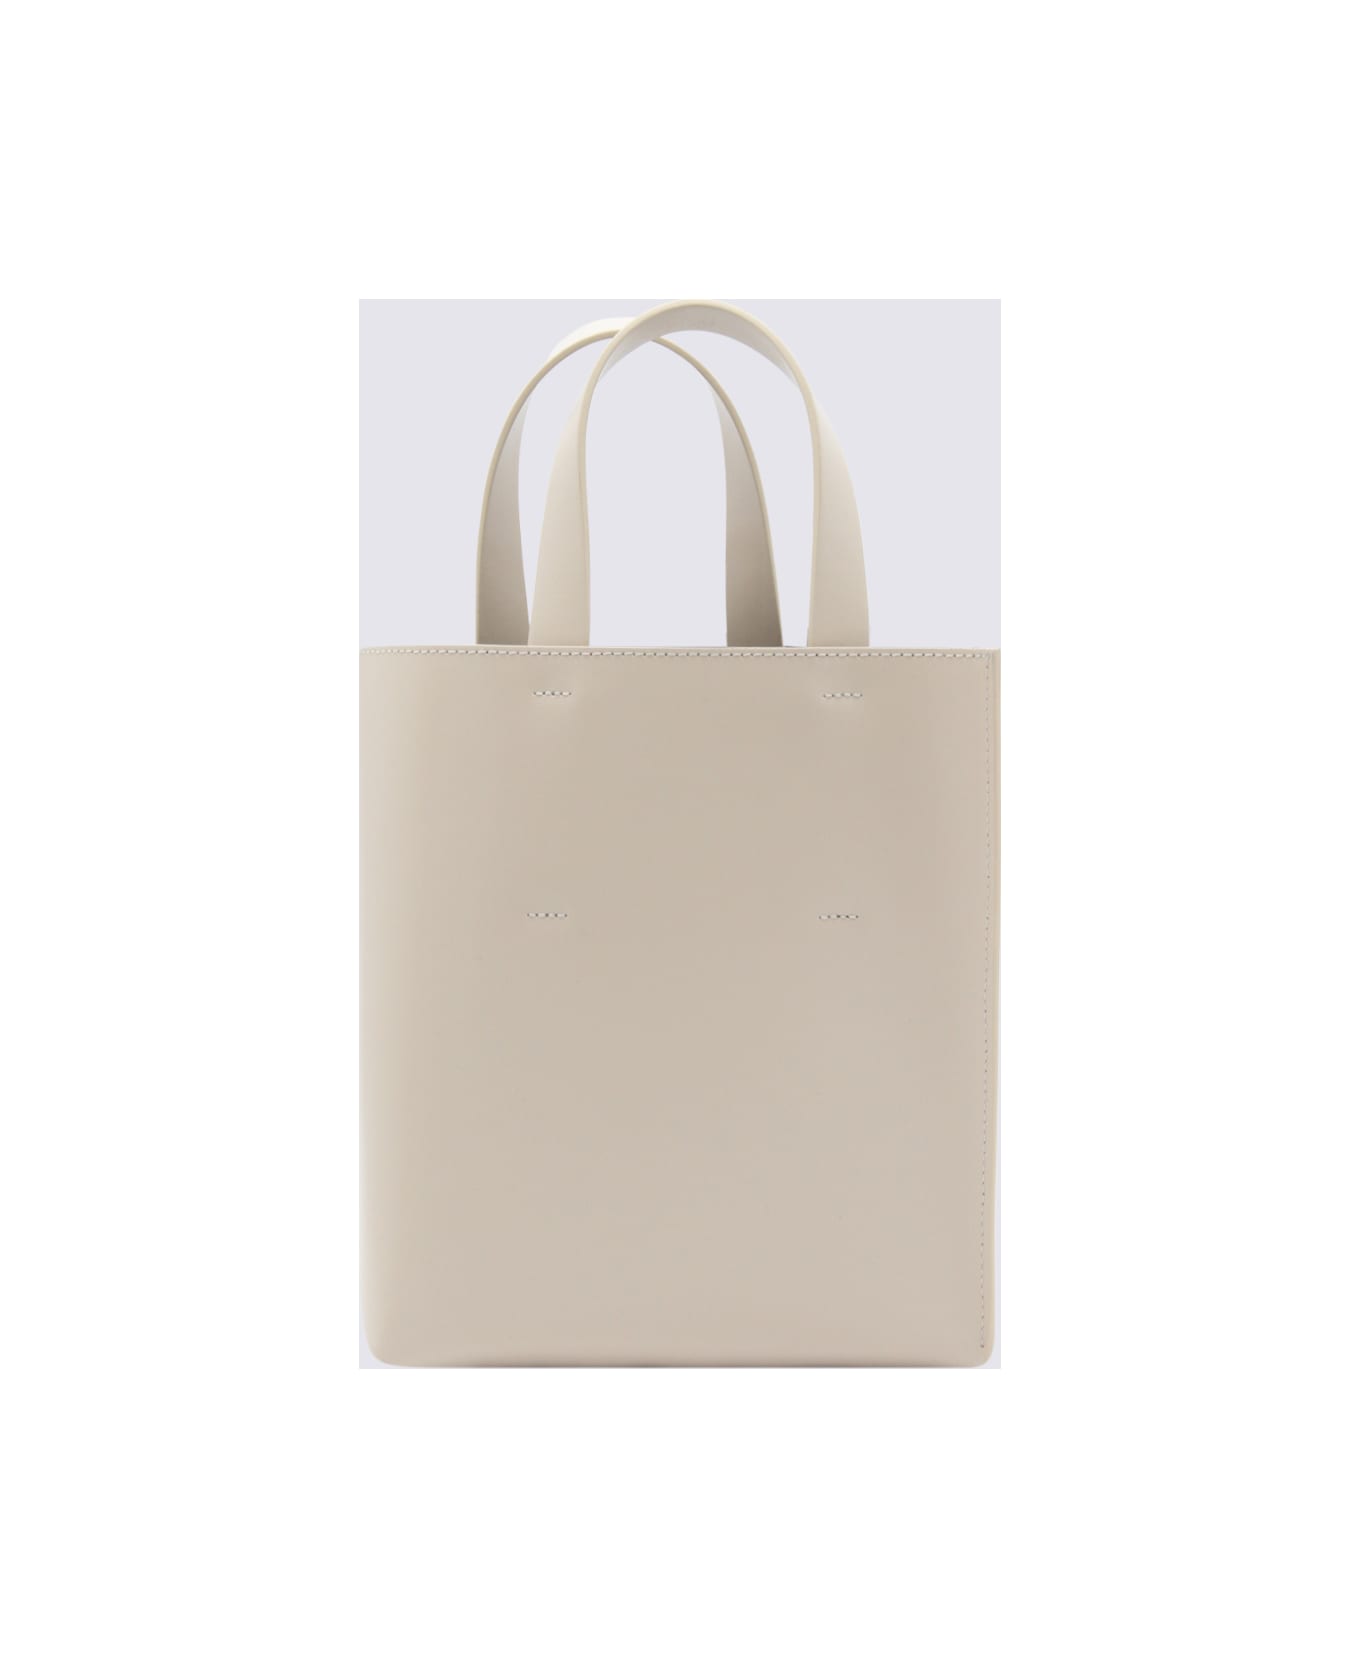 Marni White Leather Museo Tote Bag - SEASHELL トートバッグ